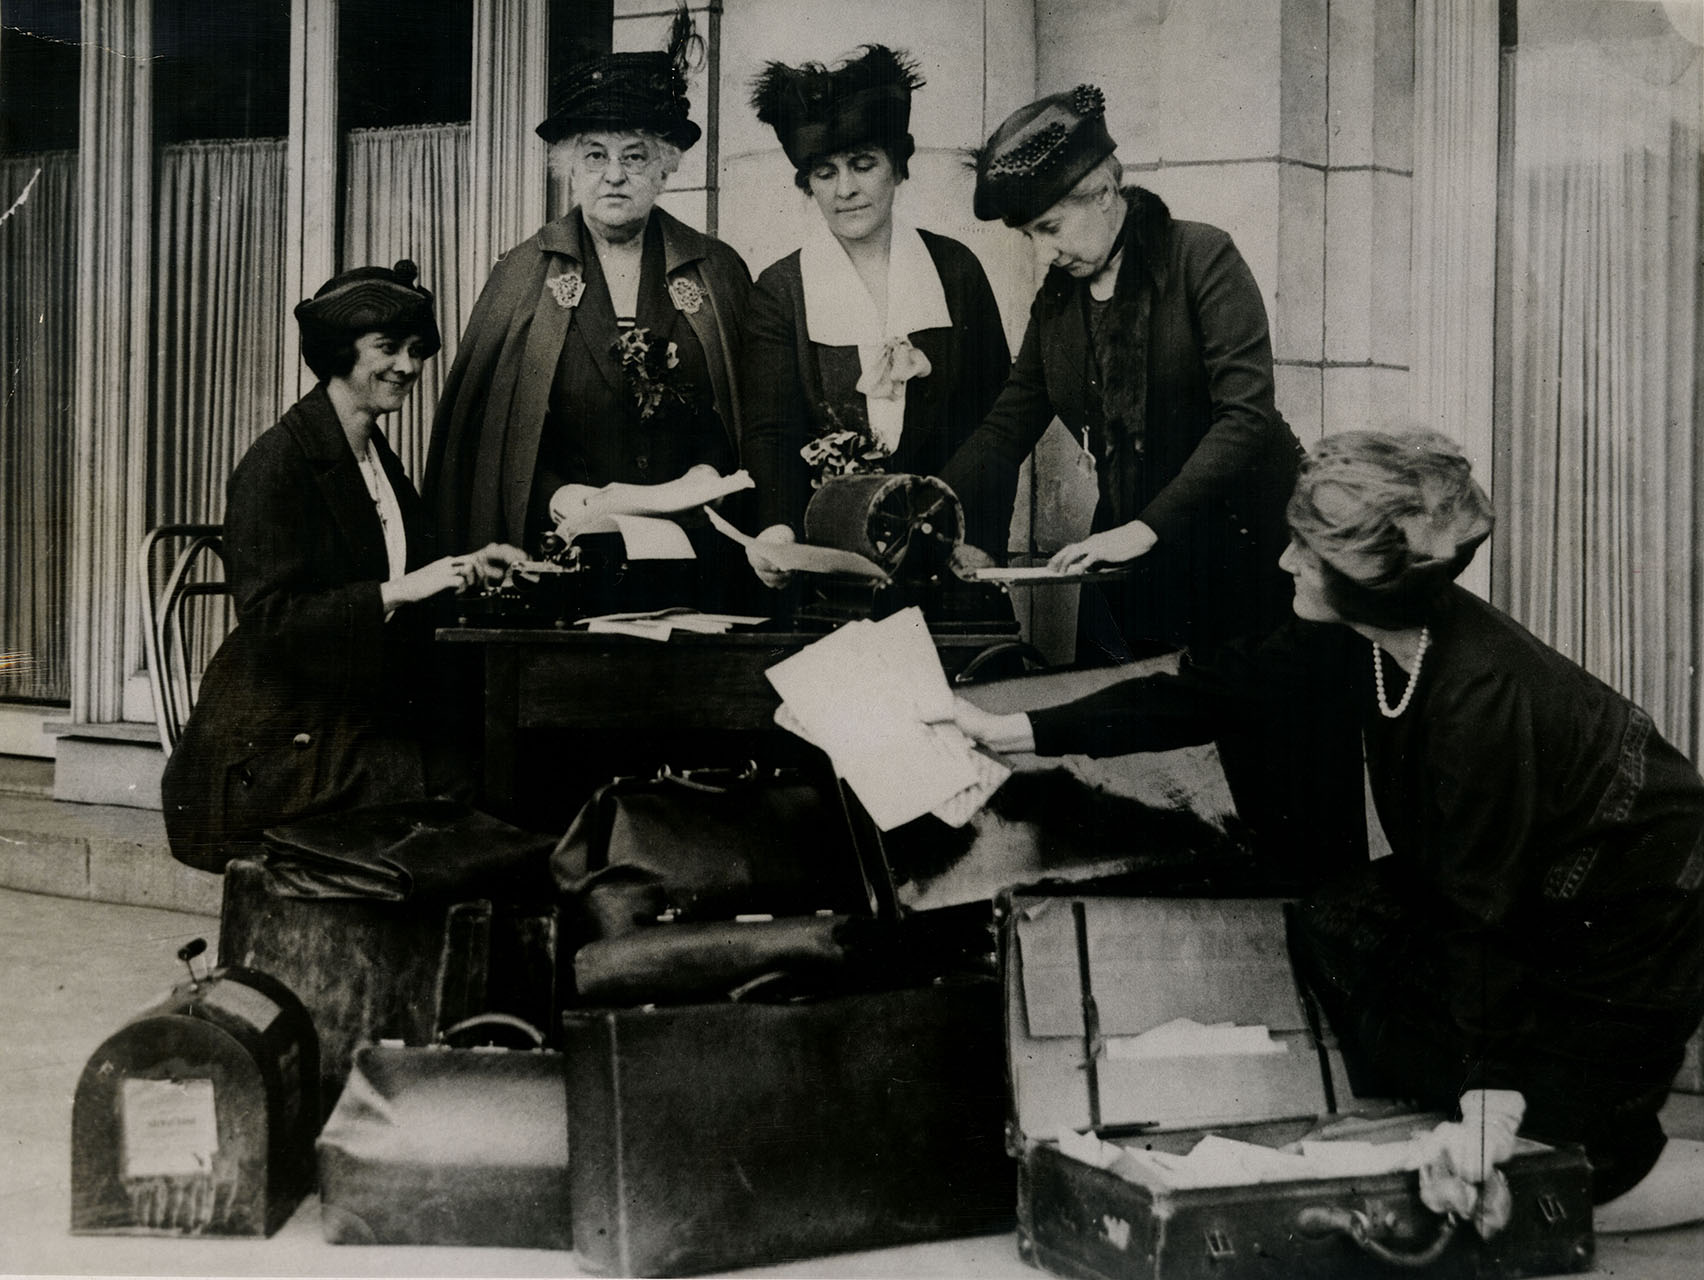 League of Women Voters members with suitcases